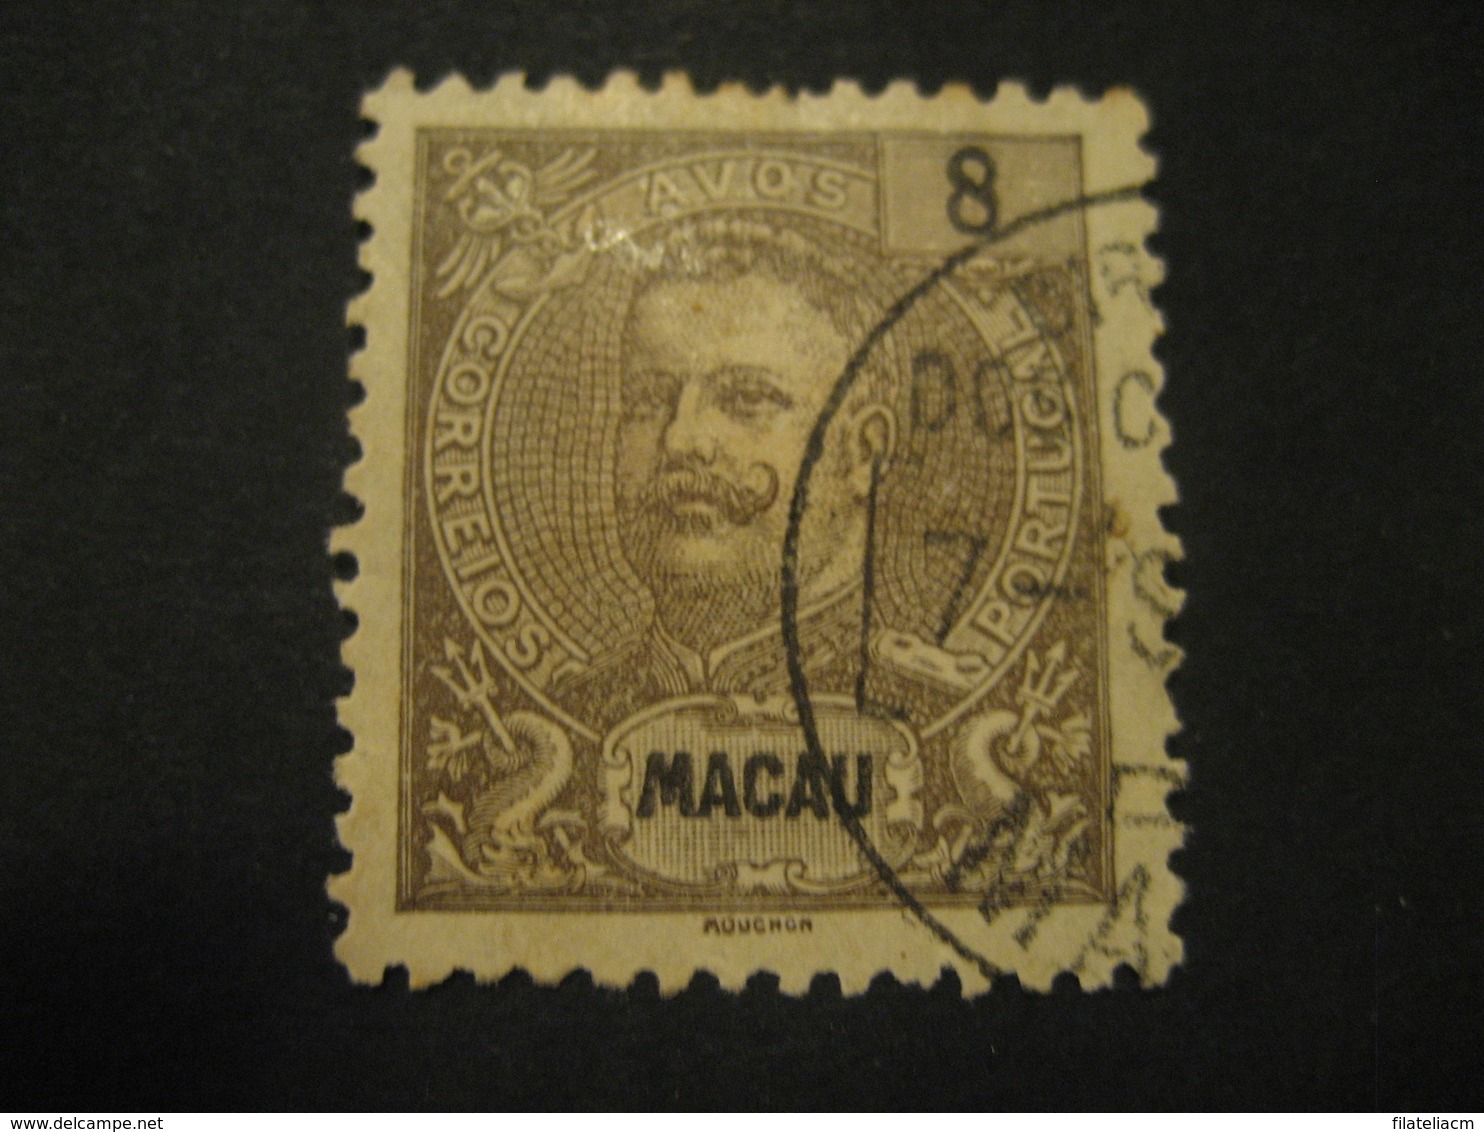 8 Avos MACAU 1903/5 Yvert 134 (Cat. Year 2008: 5 Eur) Stamp Macao Portugal China Area - Oblitérés